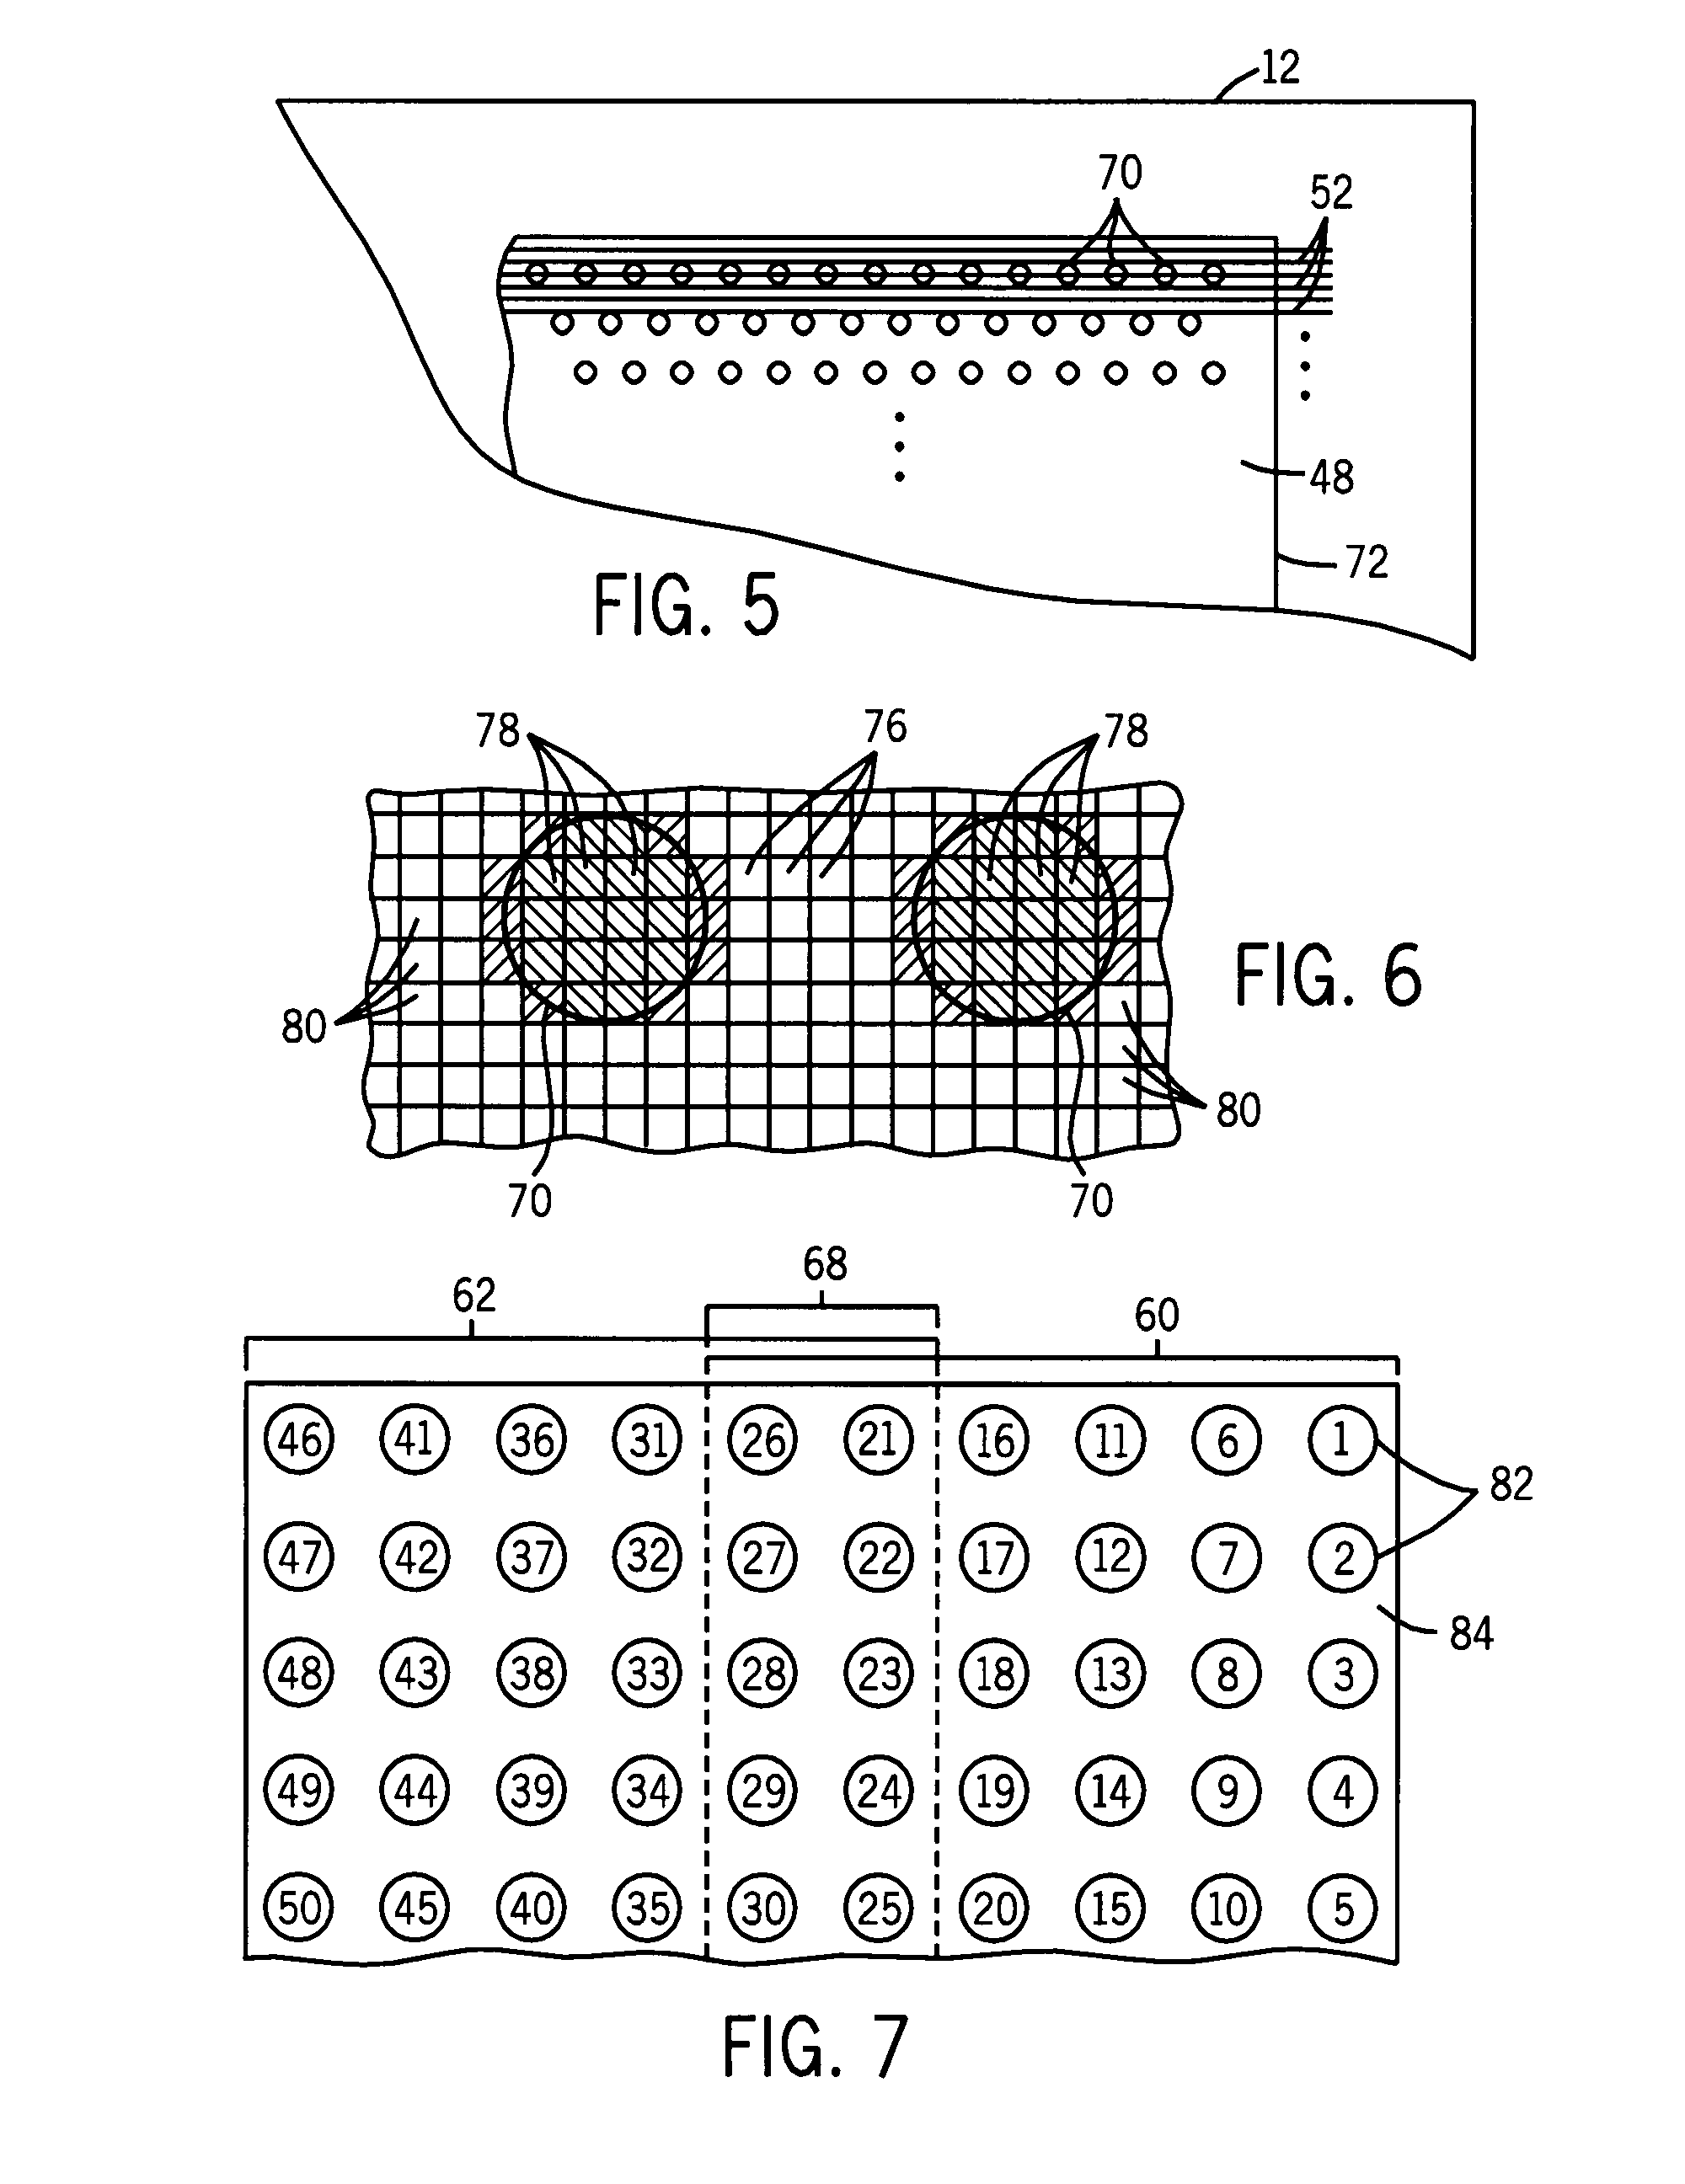 Microarray analytical data stitching system and method